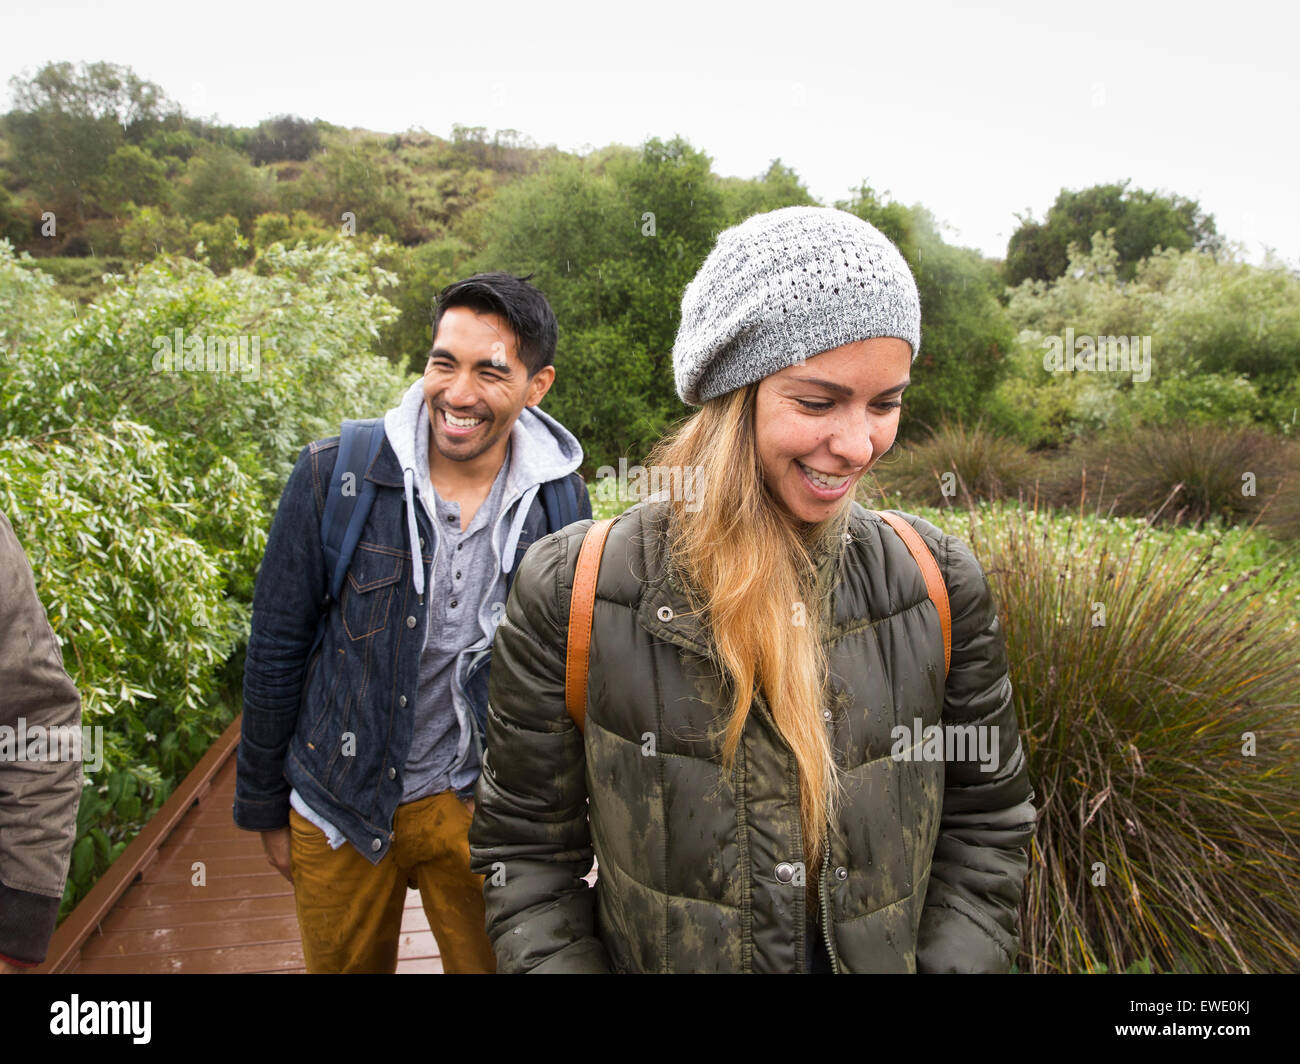 Smiling young woman and man walking in a park Stock Photo